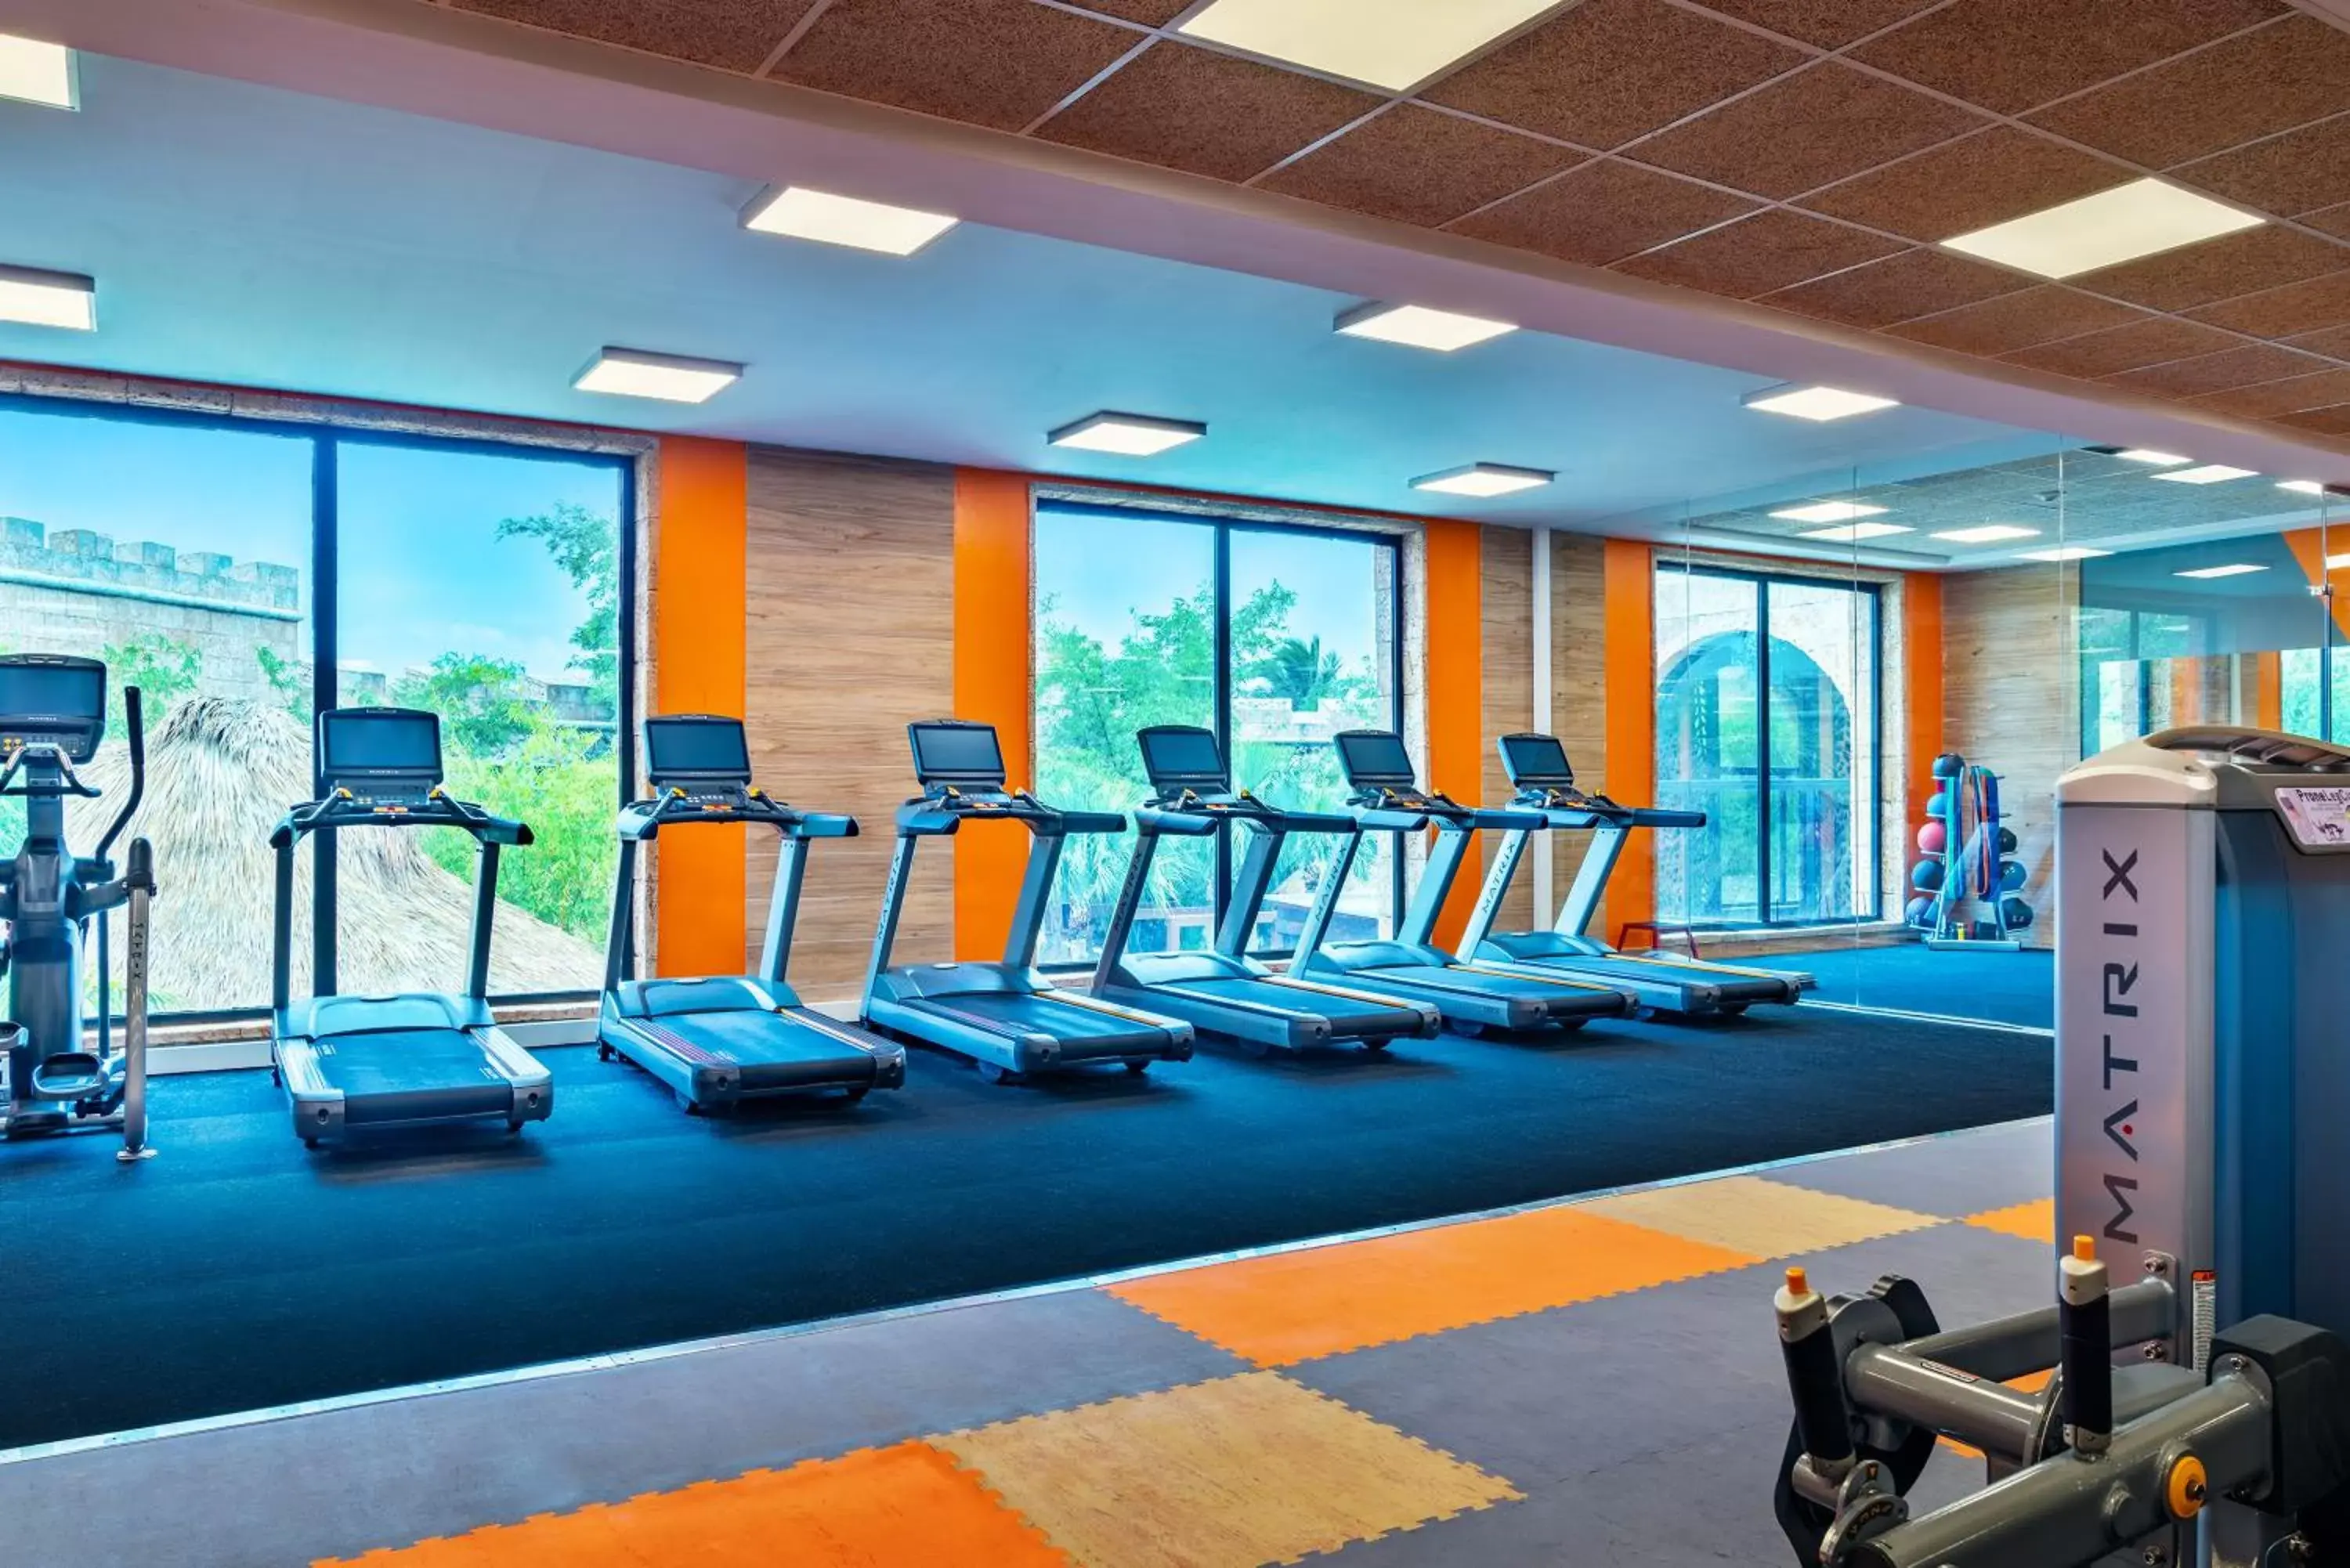 Fitness centre/facilities, Fitness Center/Facilities in Sanctuary Cap Cana, a Luxury Collection All-Inclusive Resort, Dominican Republic